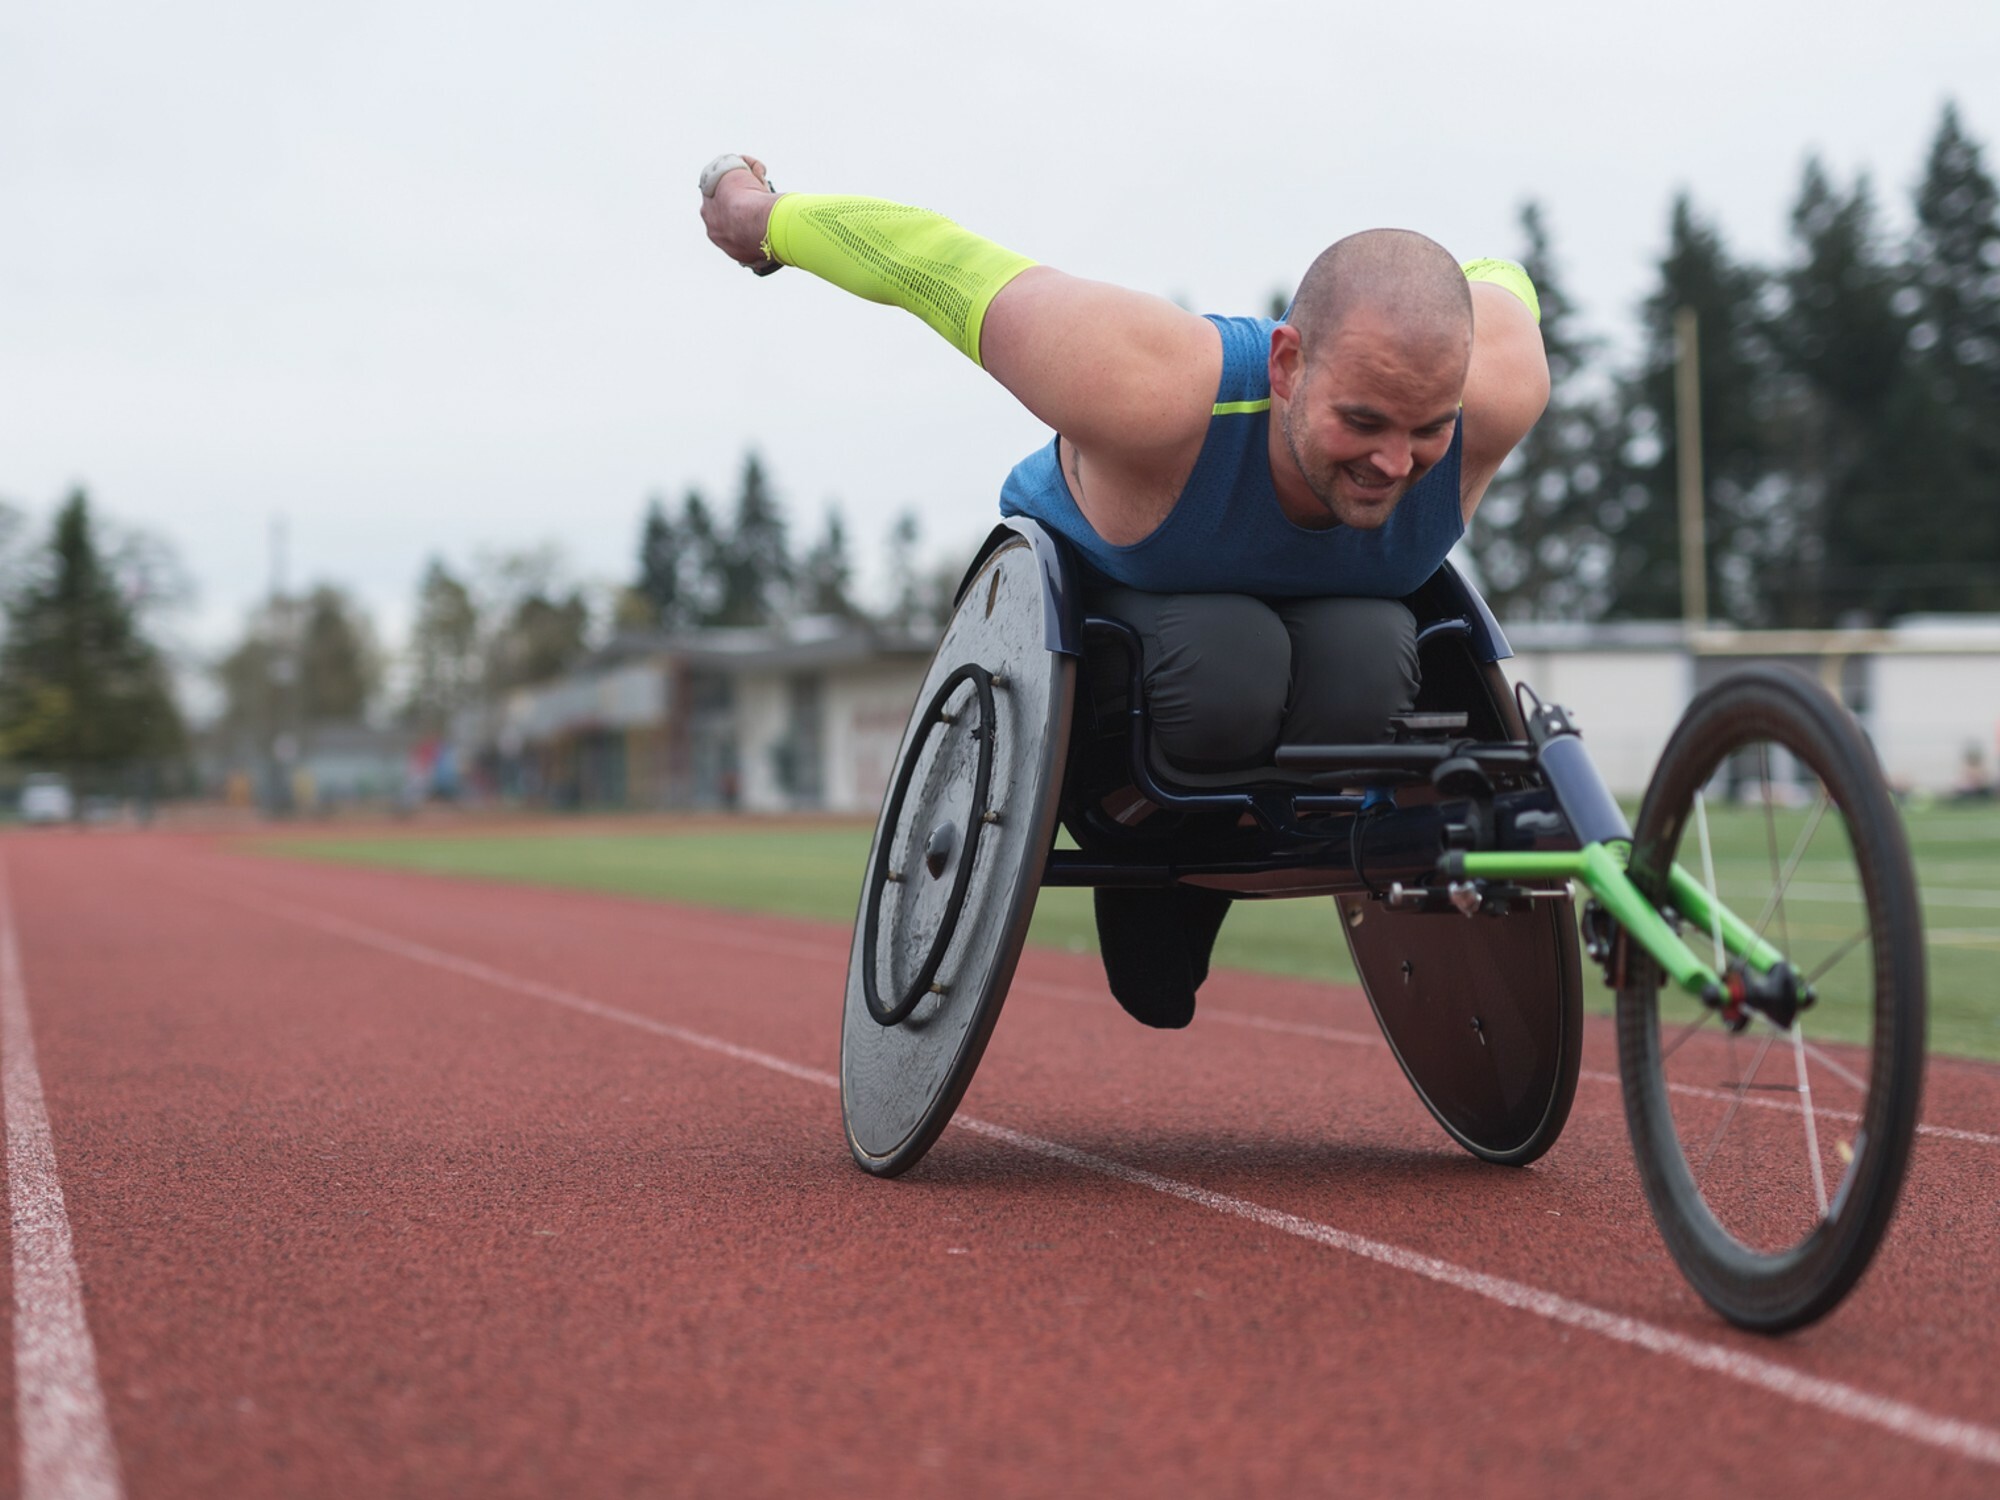 What are my adaptive sport options?